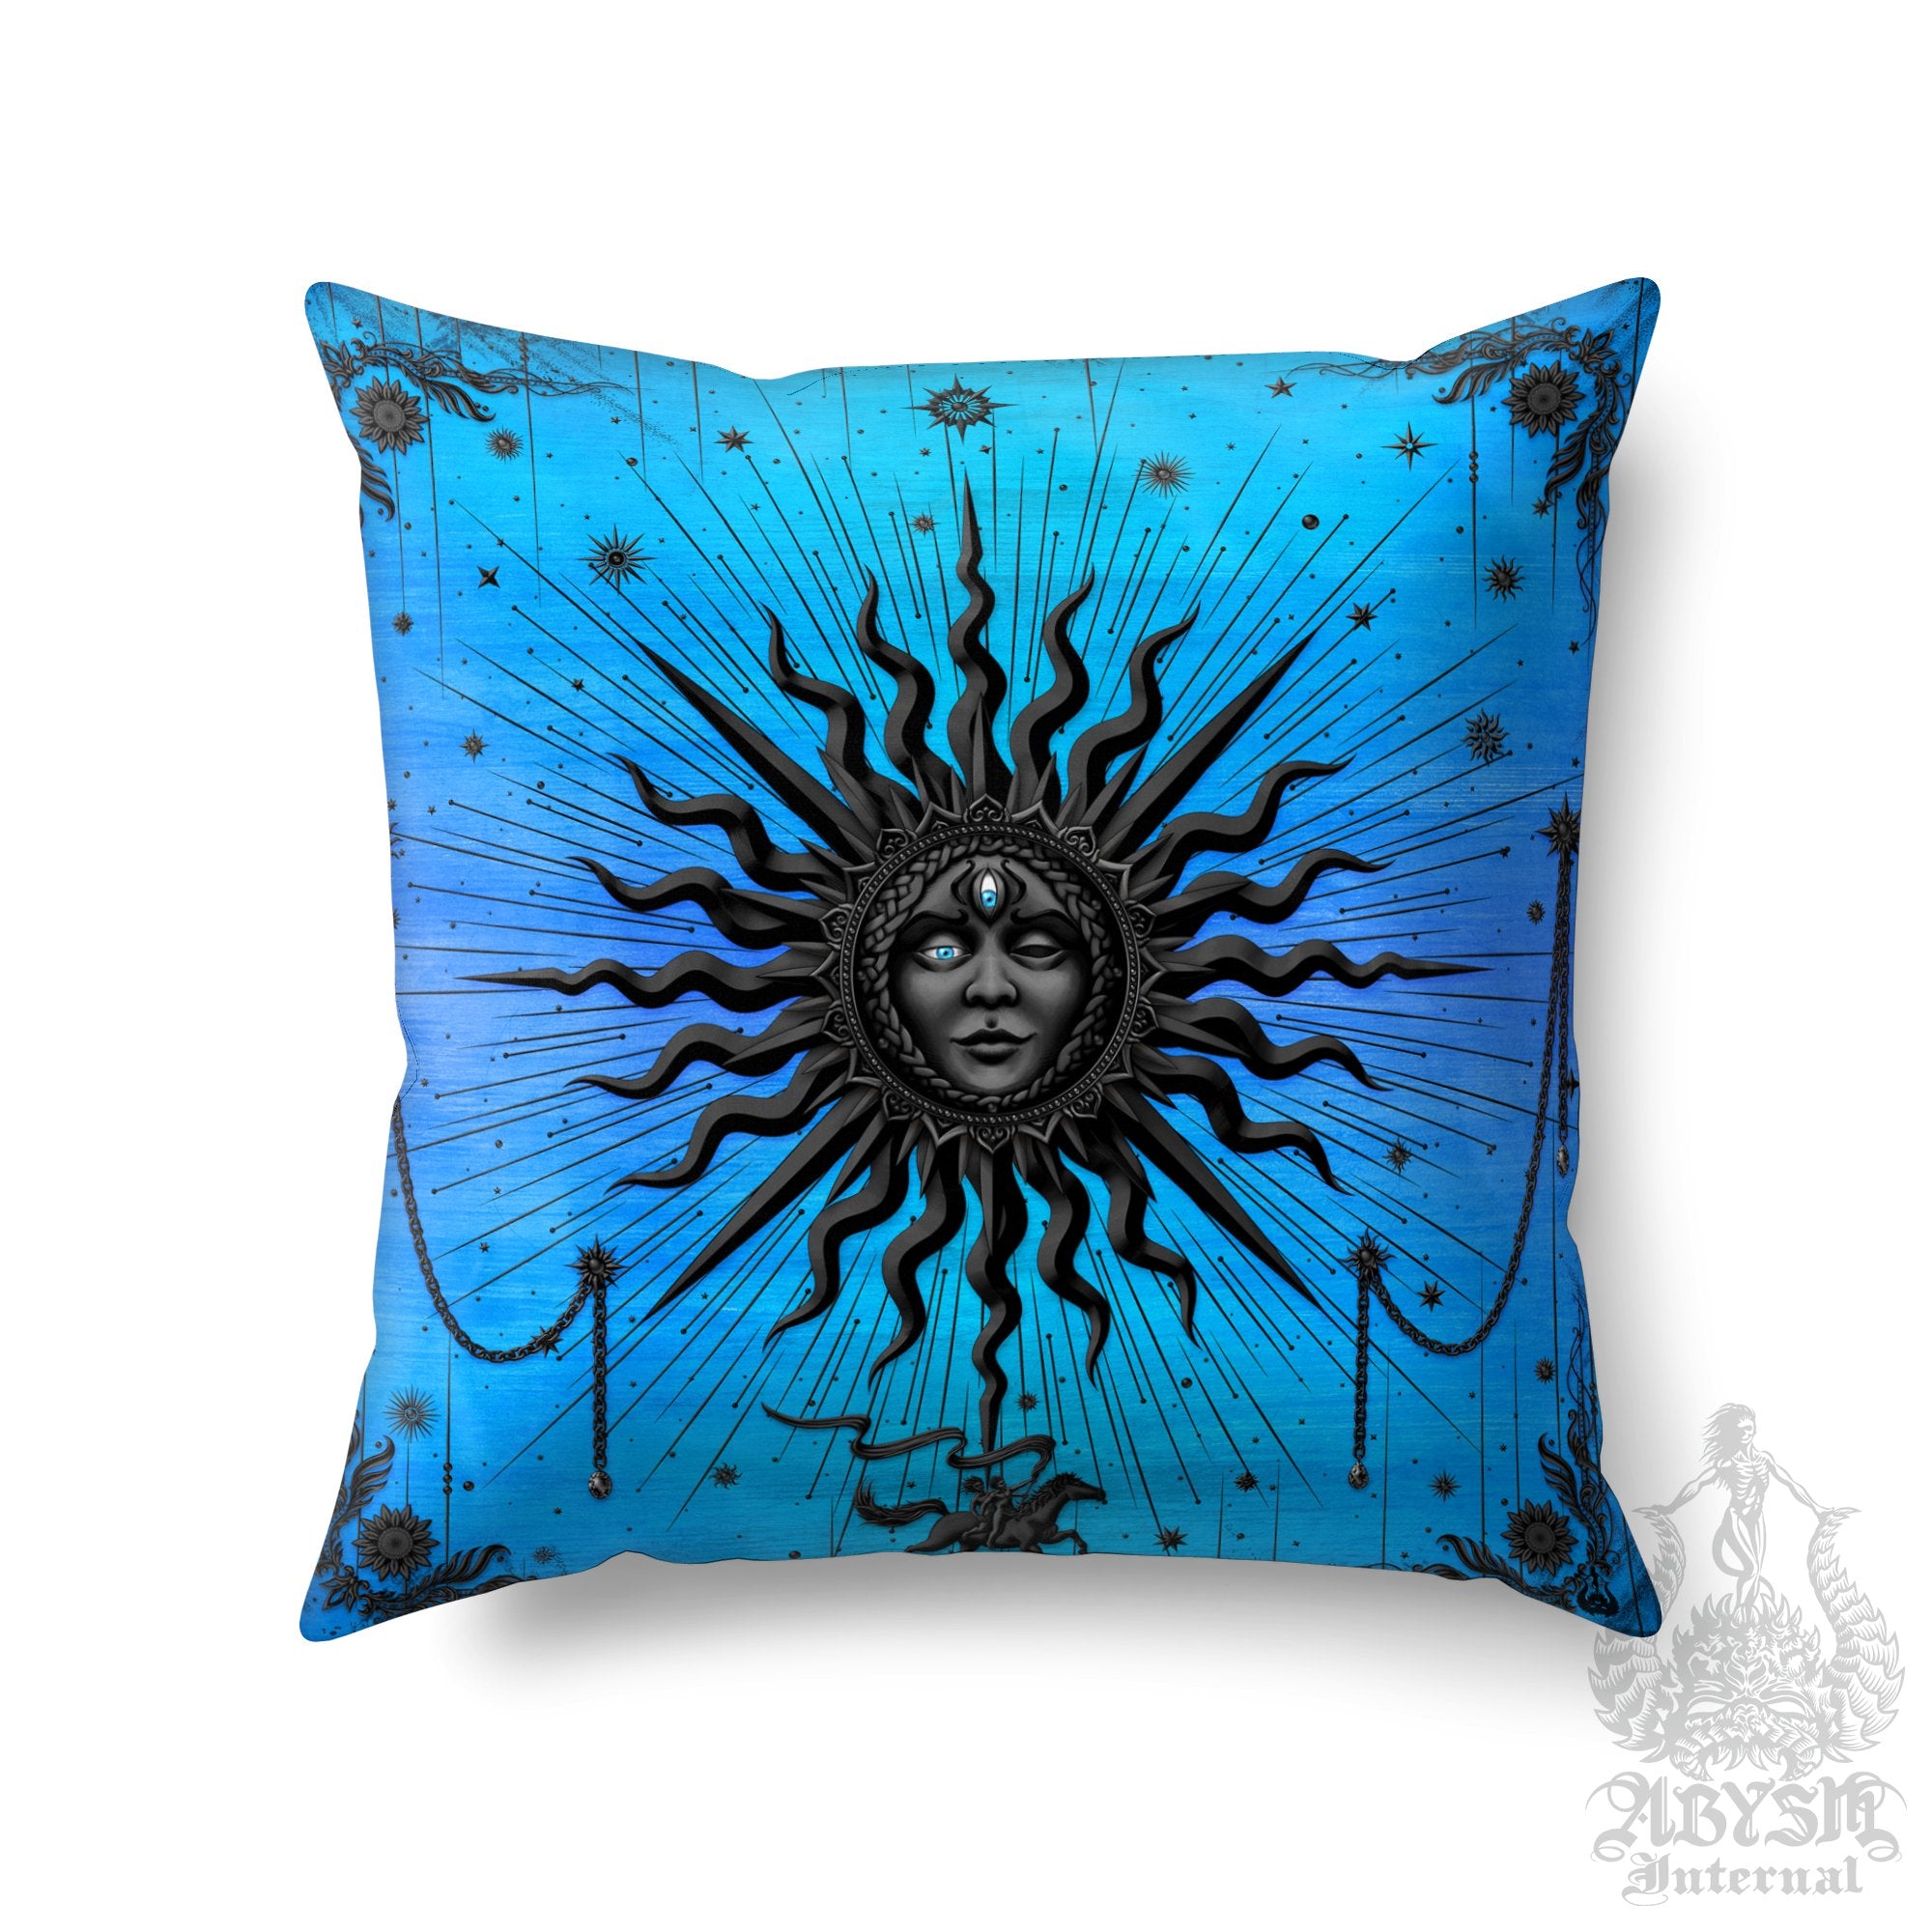 Black Sun Throw Pillow, Decorative Accent Pillow, Square Cushion Cover, Arcana Tarot Art, Witchy Home, Witch, Fortune & Magic Room Decor - Cyan - Abysm Internal